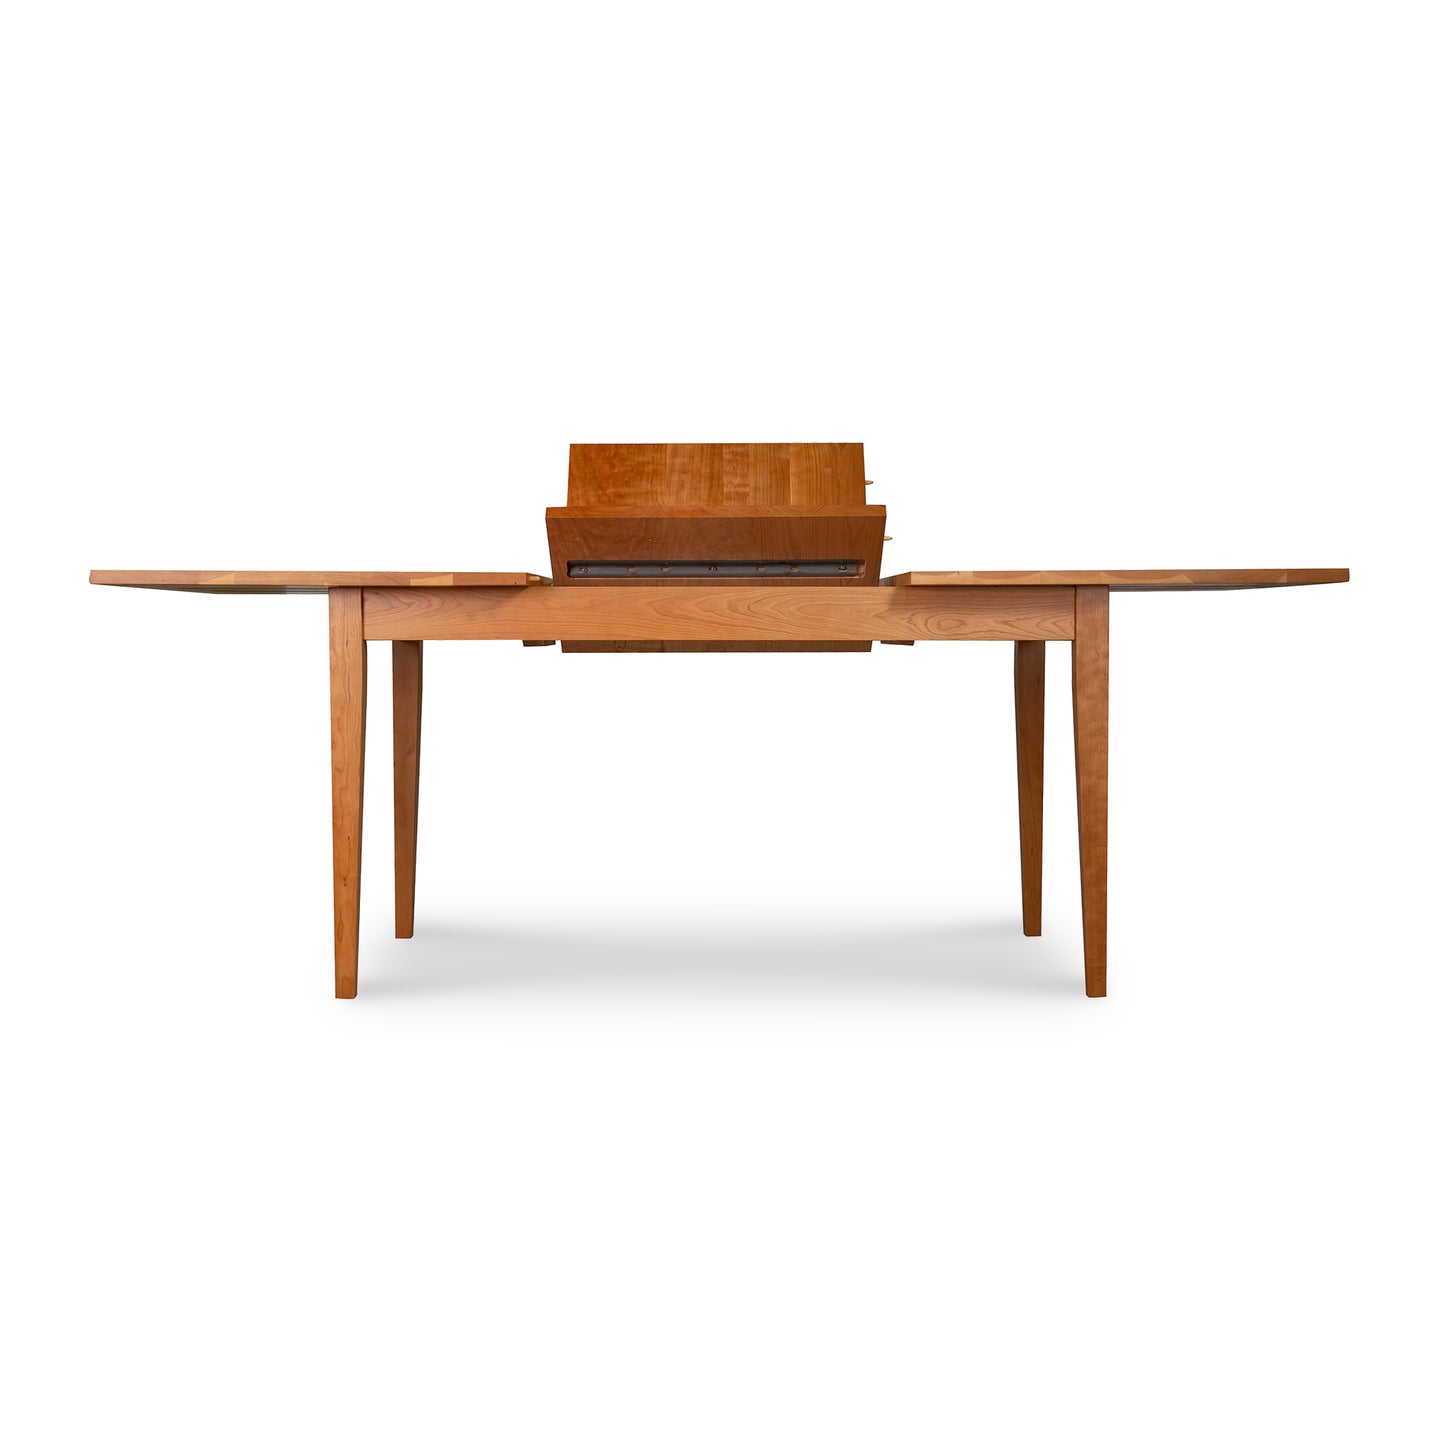 Lyndon Furniture Classic Shaker Butterfly Extension Table for sale.